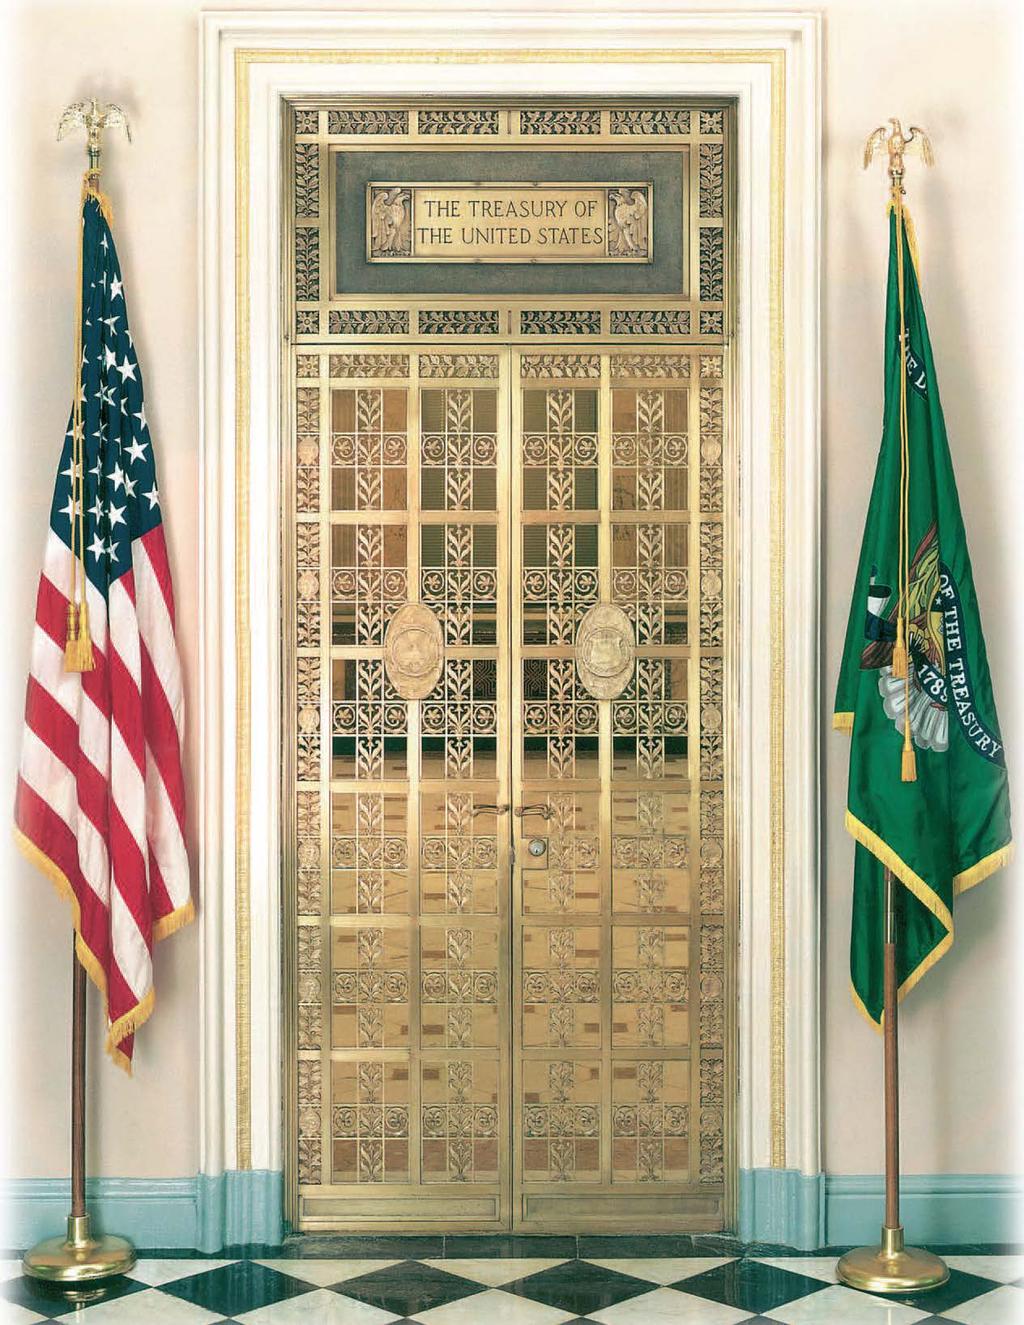 THE DEPARTMENT OF THE